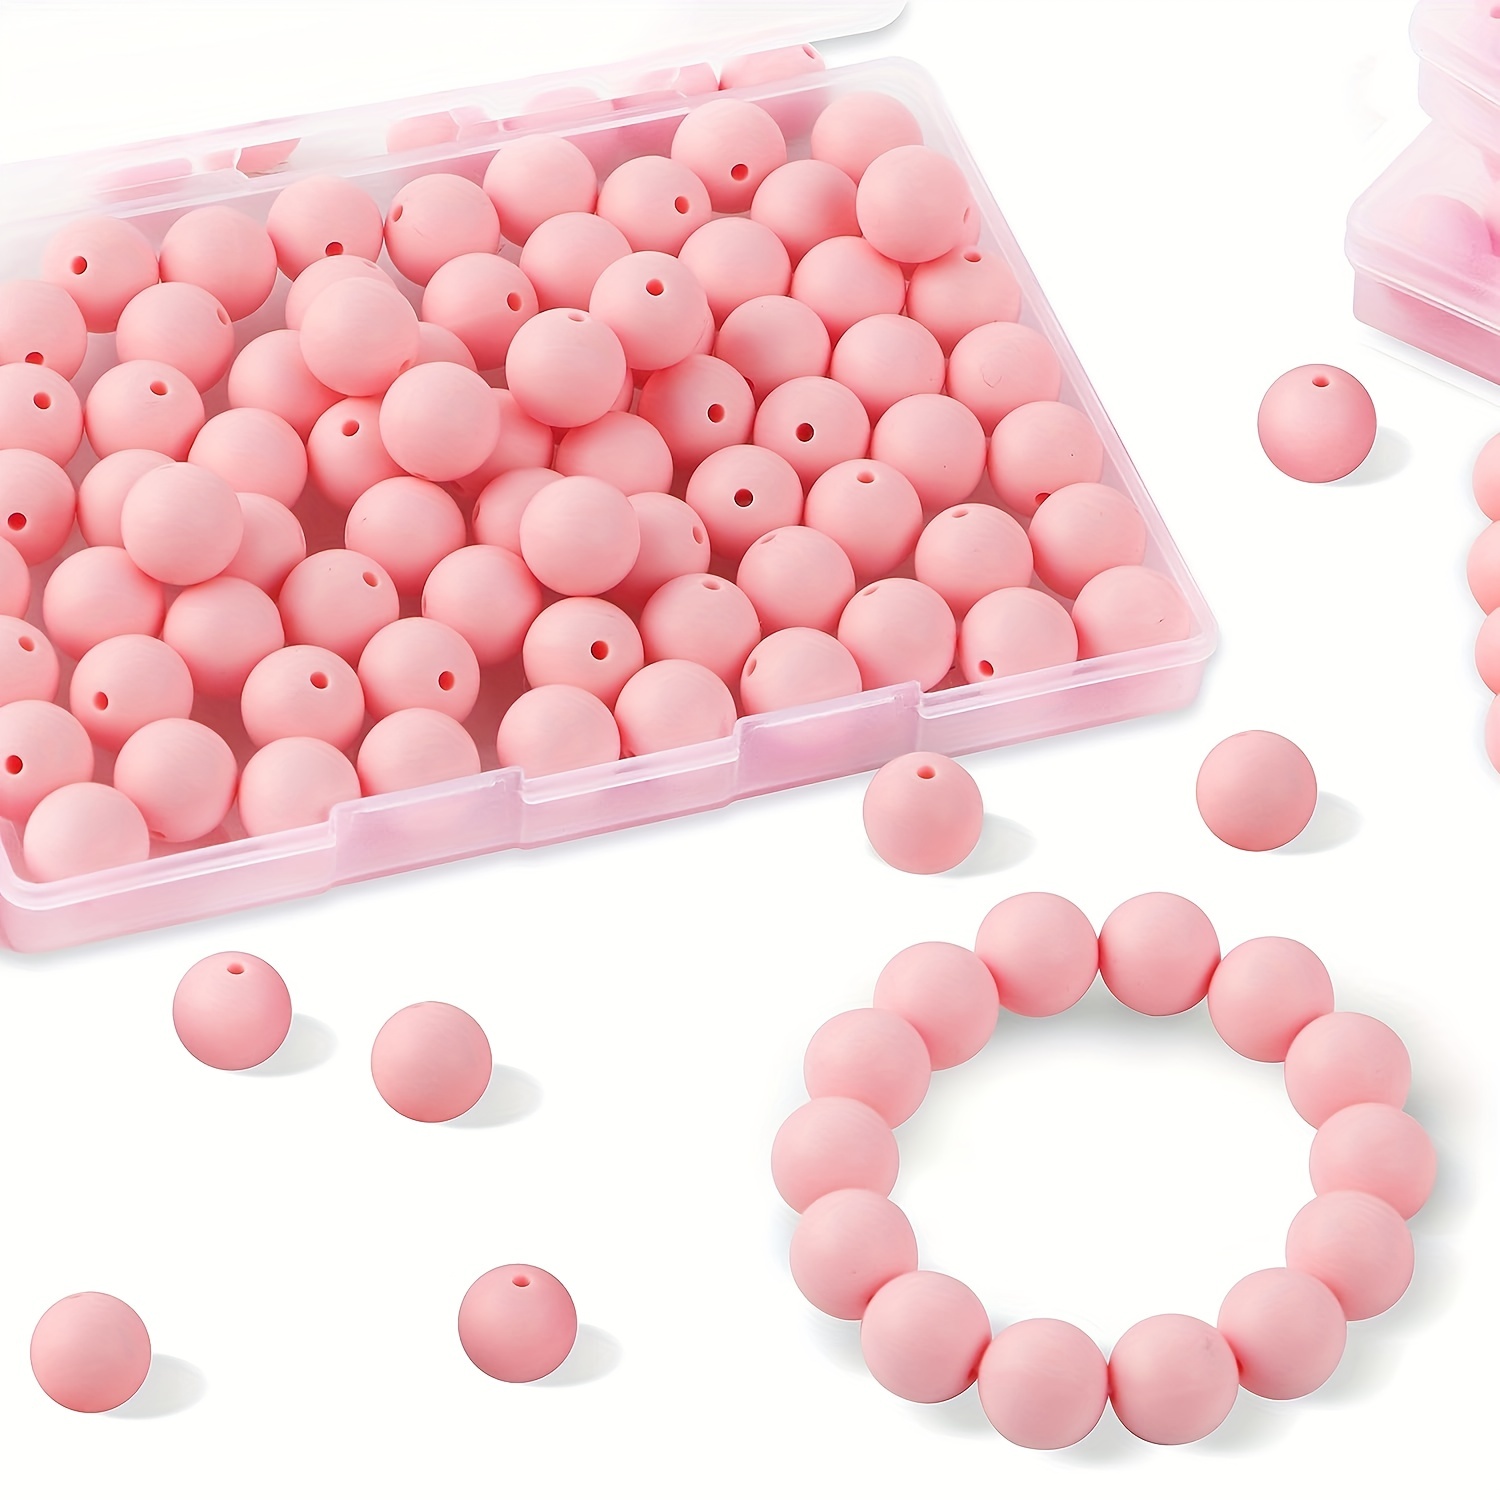 60 PCS 15mm Silicone Focal Beads Bulk Rubber Beads Craft Beads Earring